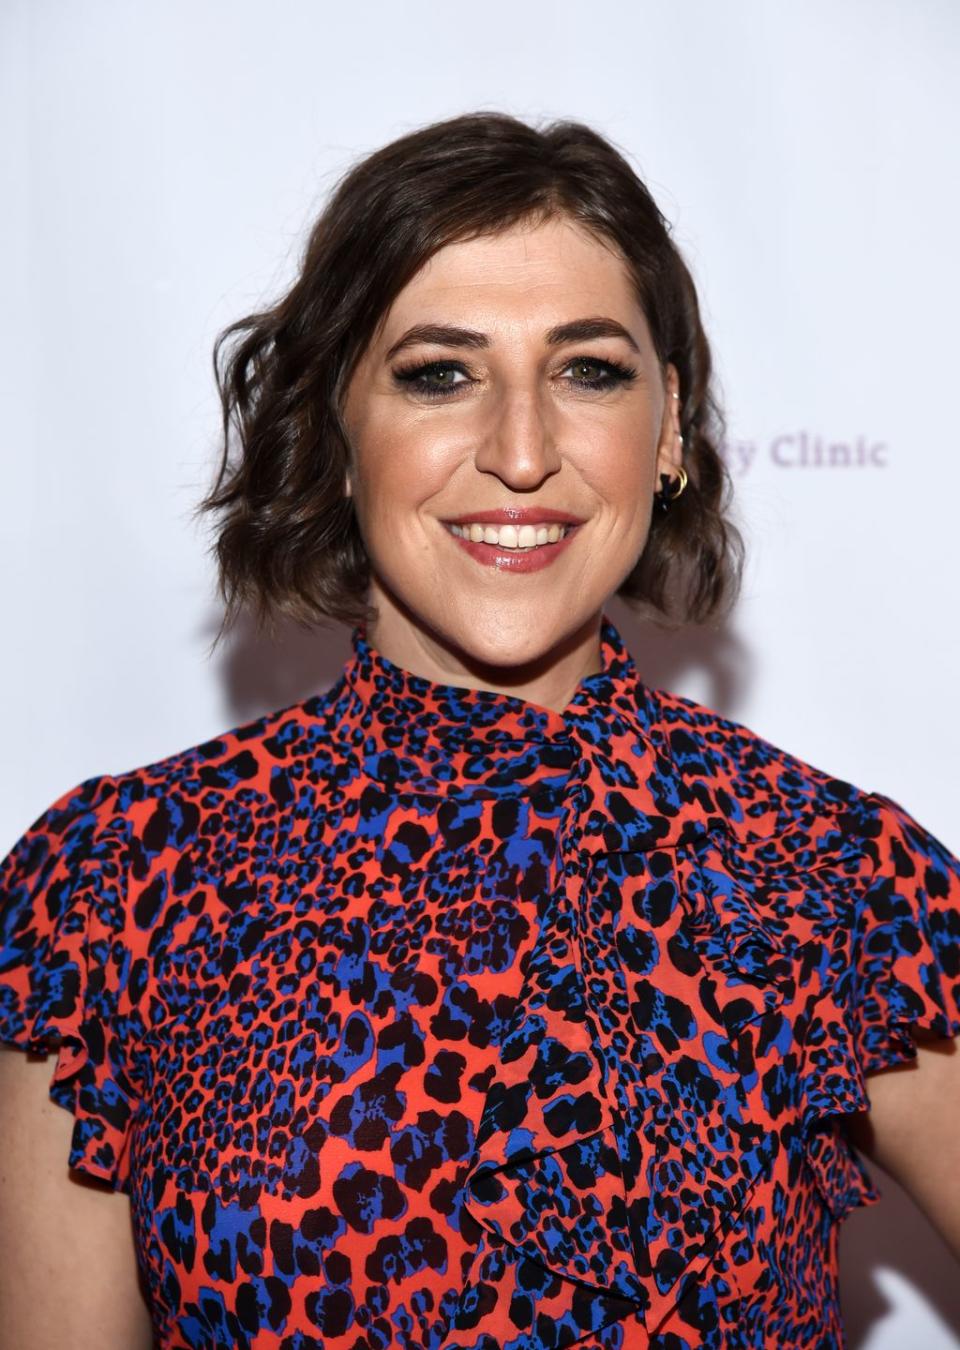 <p><strong>Schedule: </strong>May 31 - June 11</p><p><em>Big Bang Theory</em> fans may know her best as Amy Farrah Fowler, but this summer, <em>Jeopardy</em>! fans will welcome her as the temporary host of the trivia show. Meanwhile, the actress will continue to star in her new Fox sitcom, <em>Call Me Kat</em>.</p>